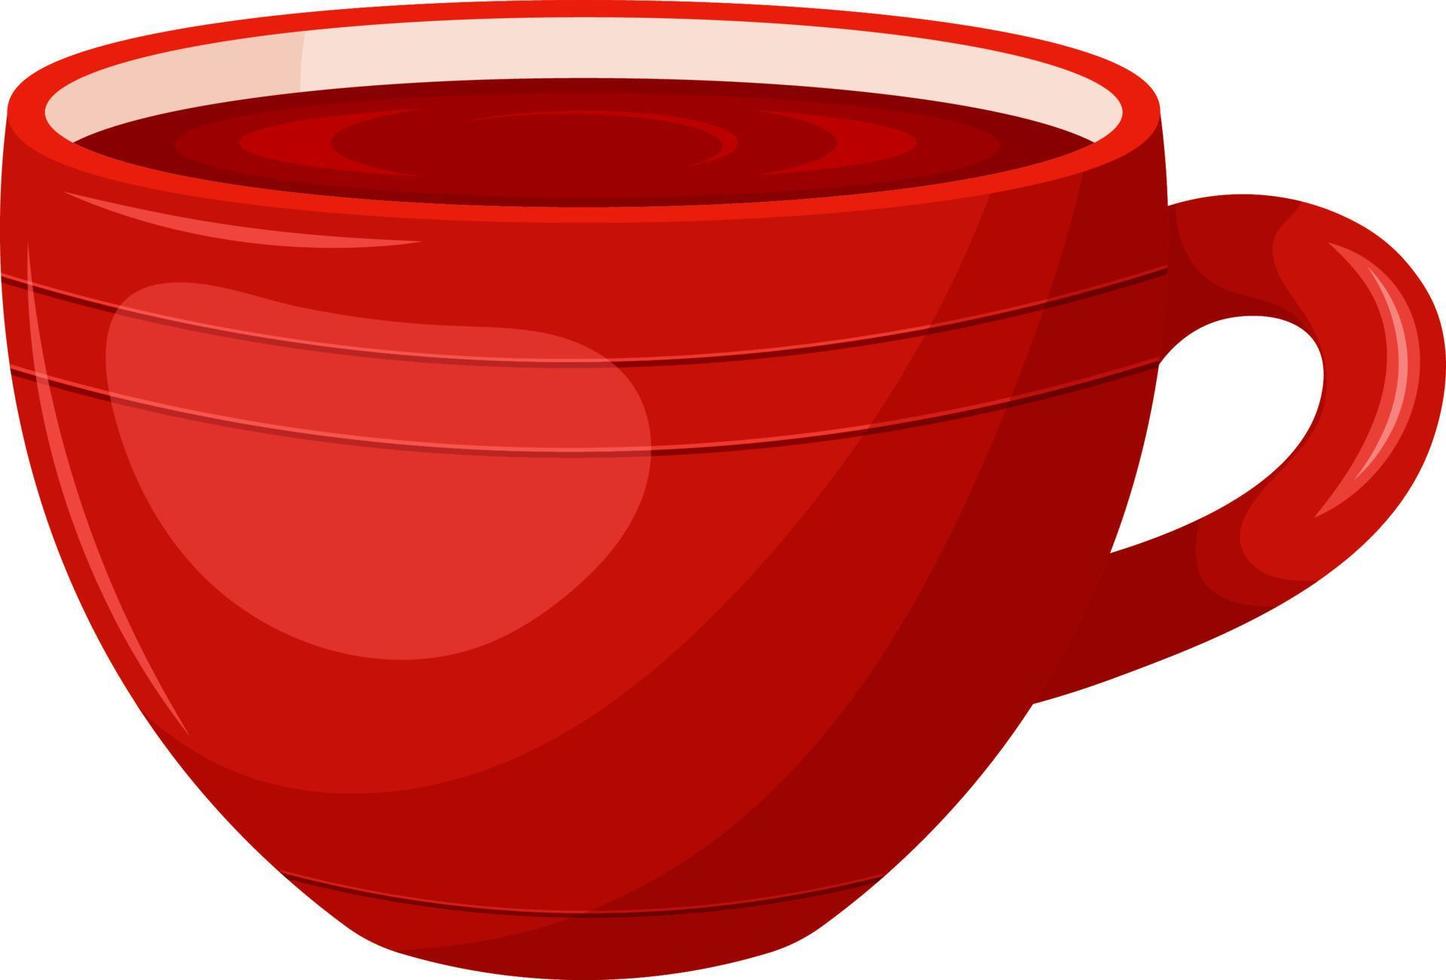 Red cup with tea or coffee vector